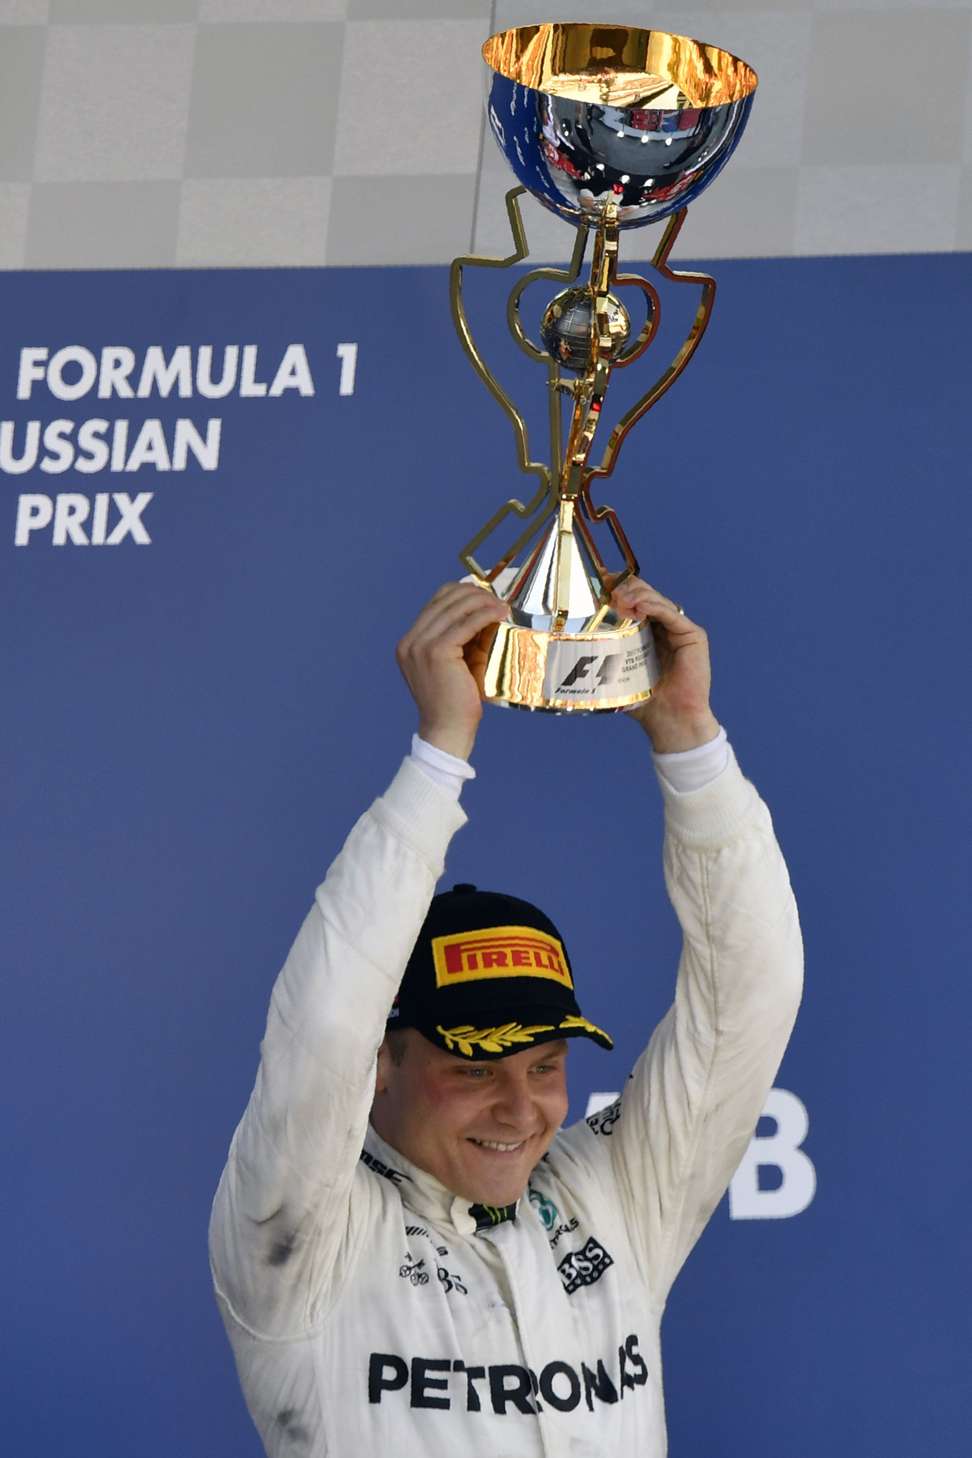 Valtteri Bottas takes delight in his victory. Photo: AFP